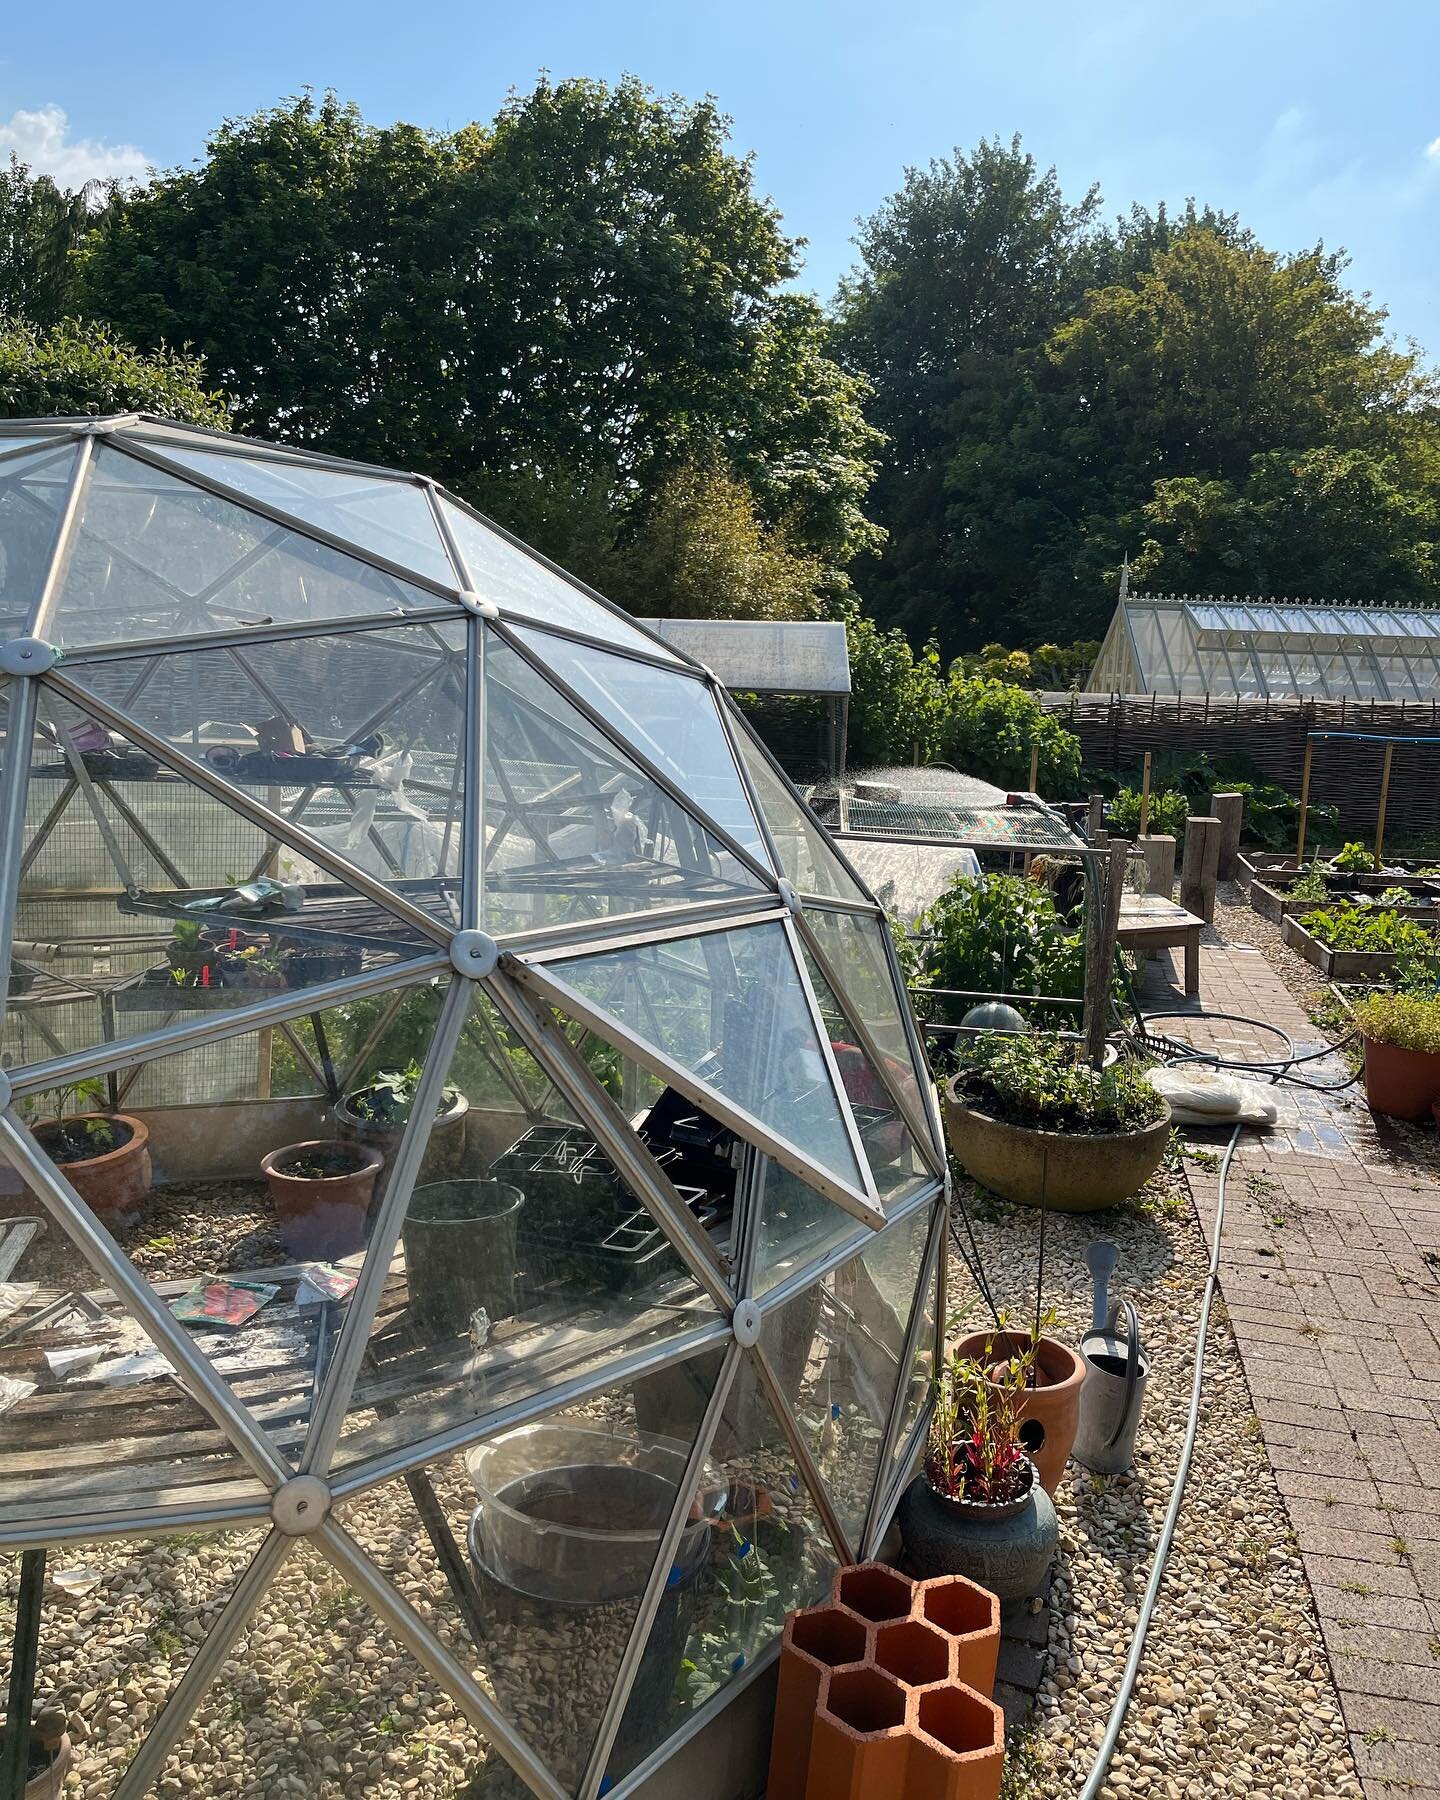 Our kitchen garden production is up thanks to #nodig @charles_dowding 
a really excellent book, plant labels by Faye Matthews.  #countrylife #oxfordarchitect #kitchengarden #geodesicdome #kale